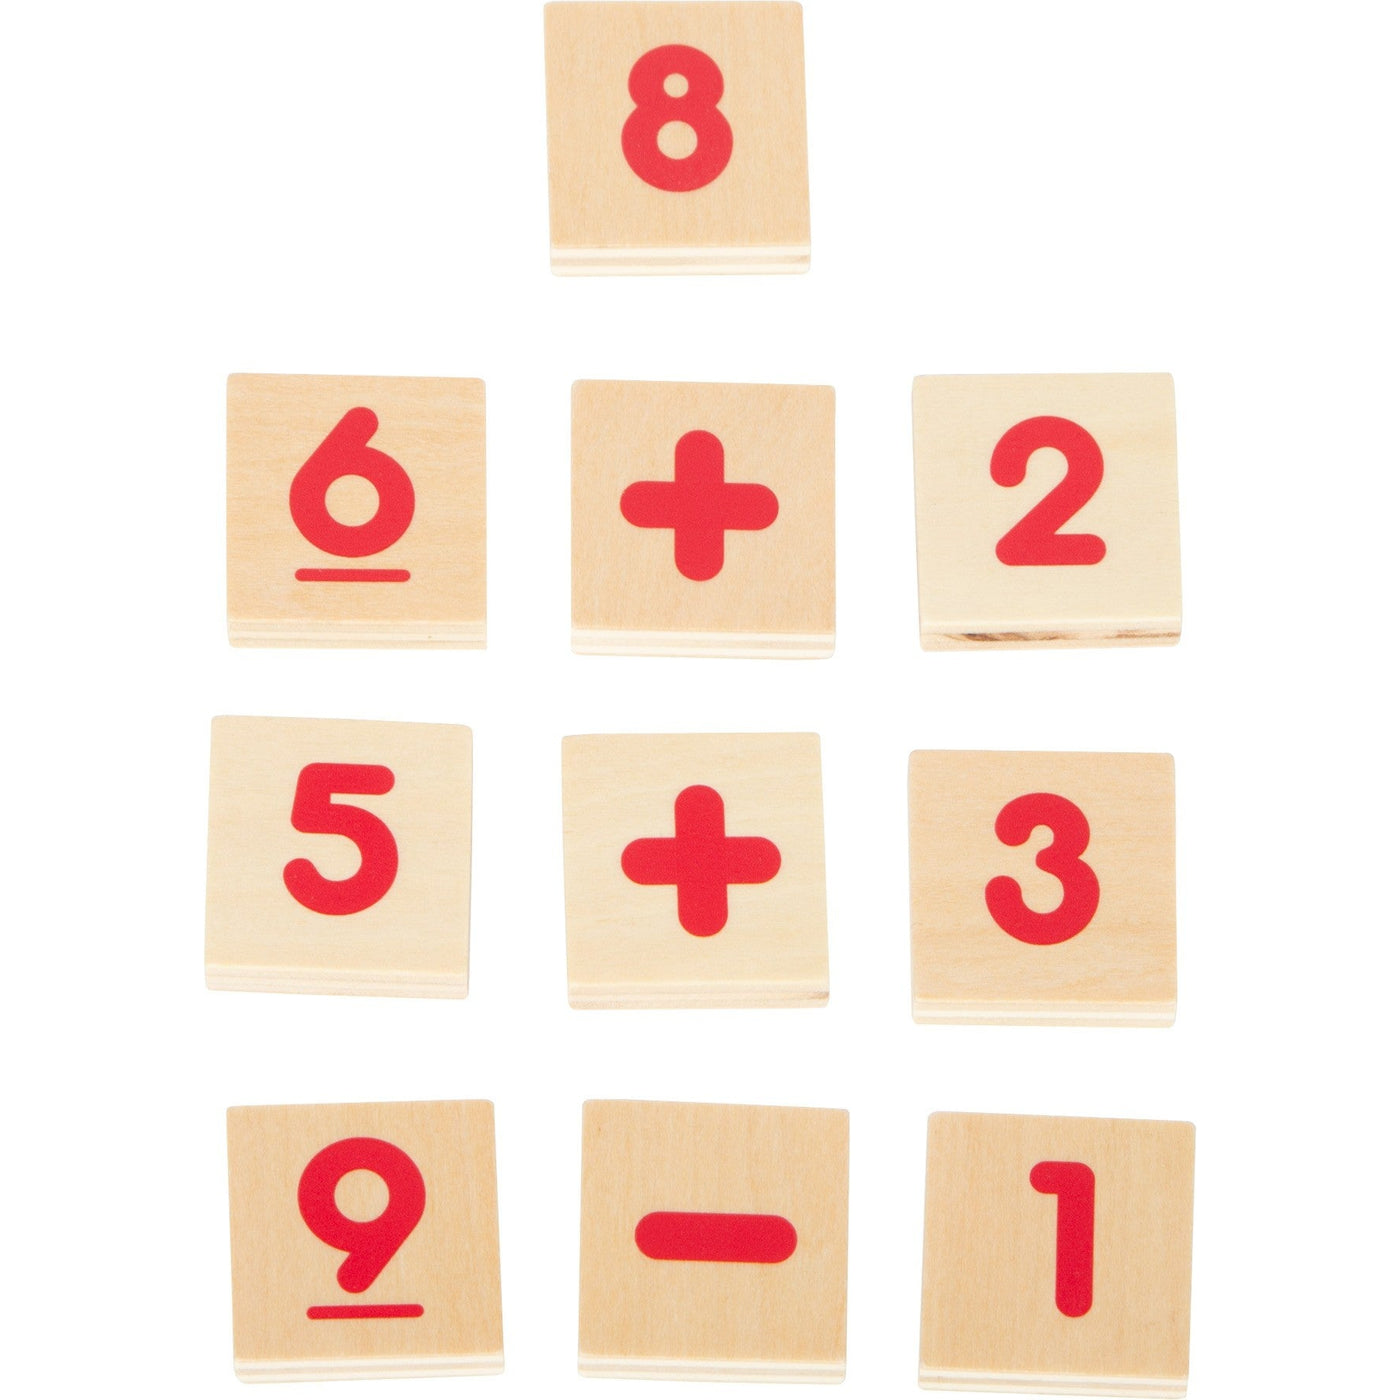 Primary School Mathematics Learning Game